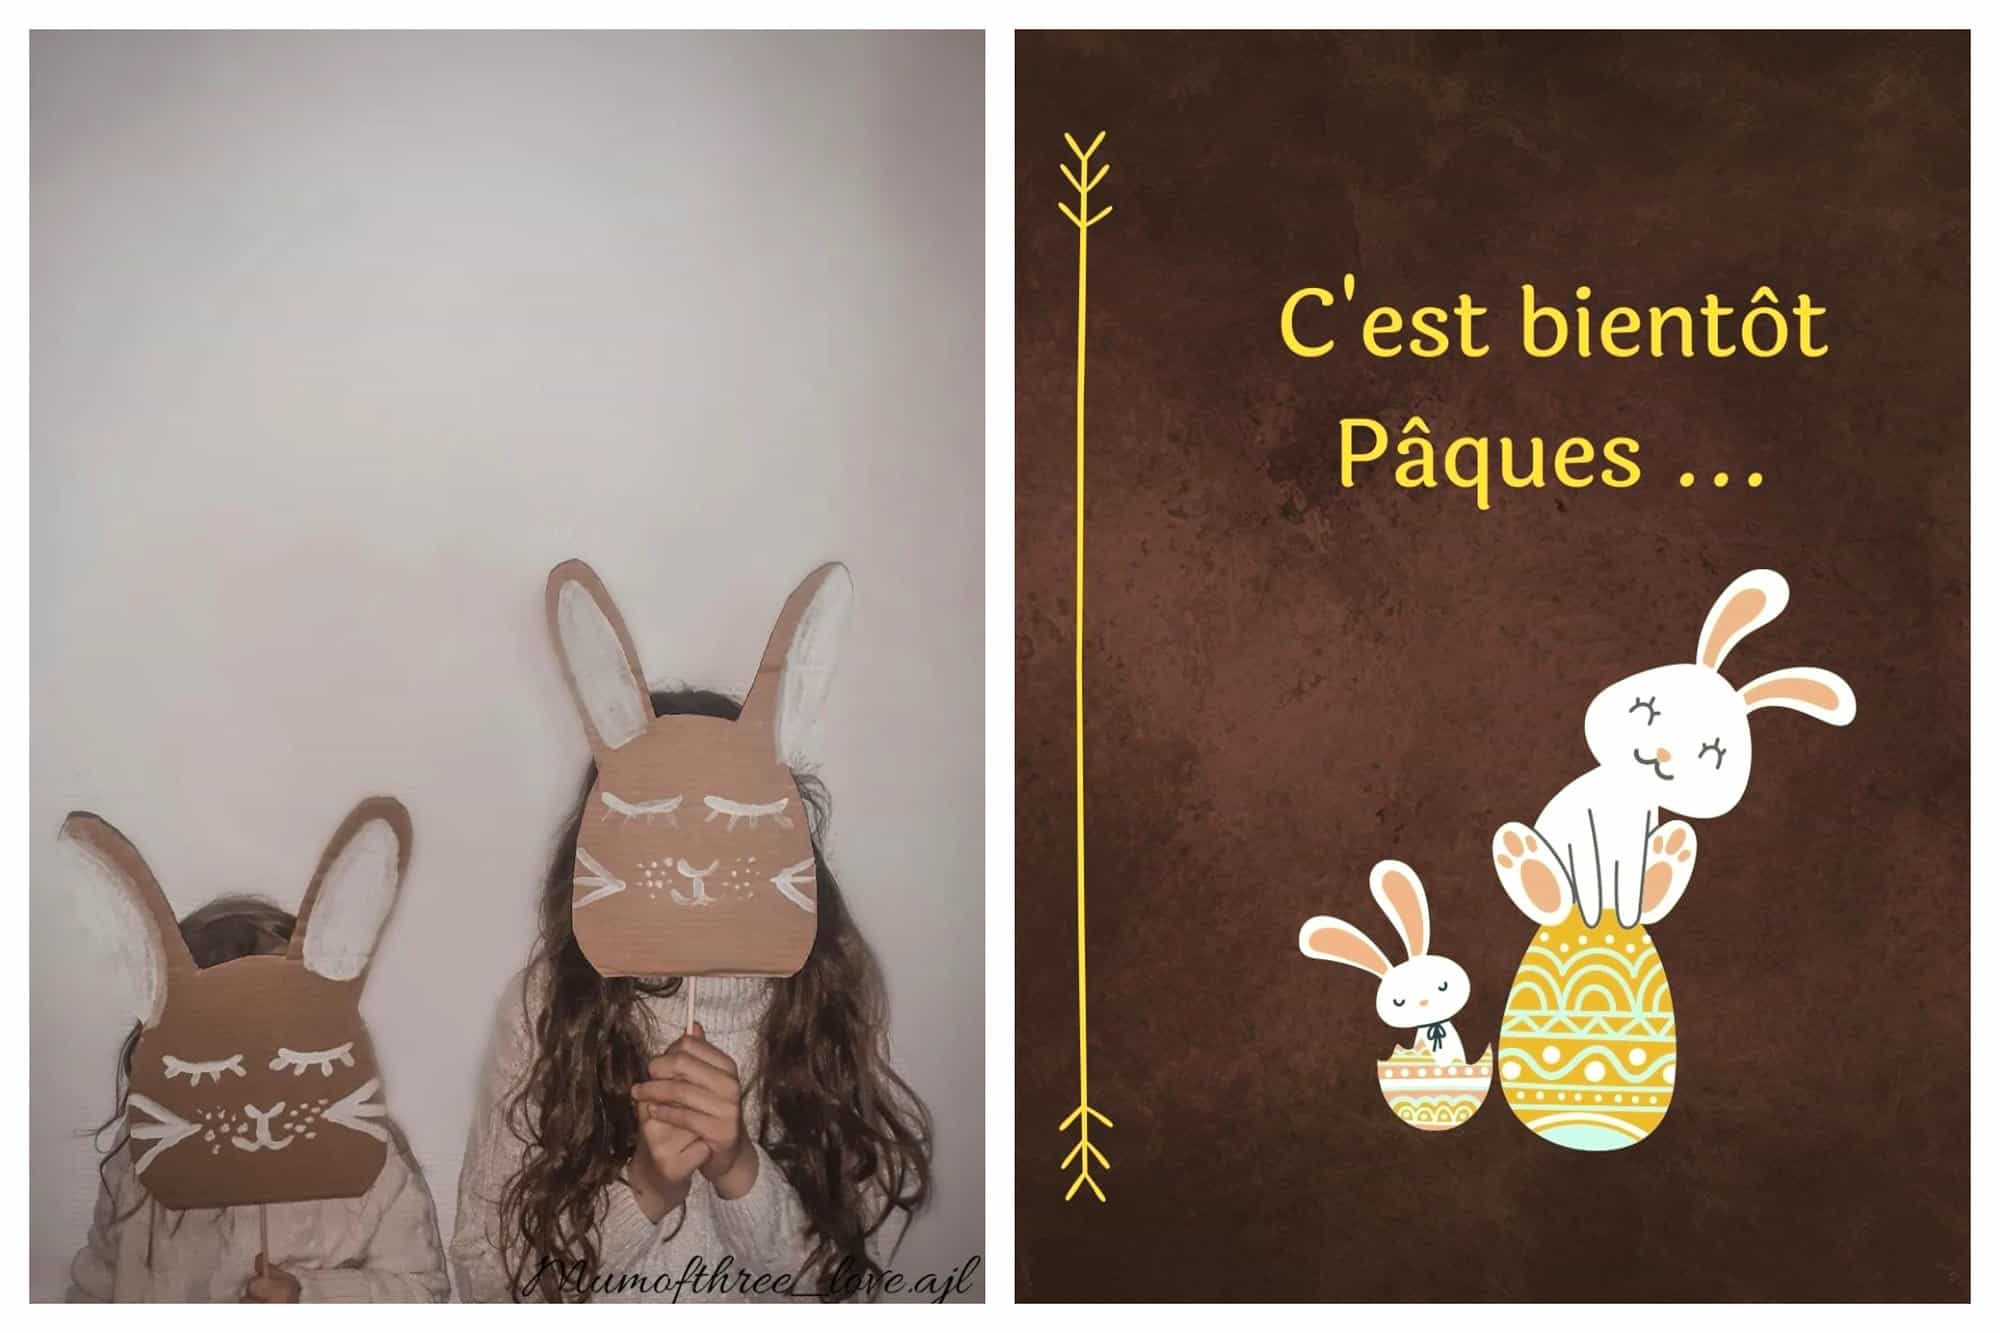 Left- 2 young girls hold hand made Easter bunny masks in front of their faces. 
Right- An ad is shown with 2 Easter bunnies in eggs. 